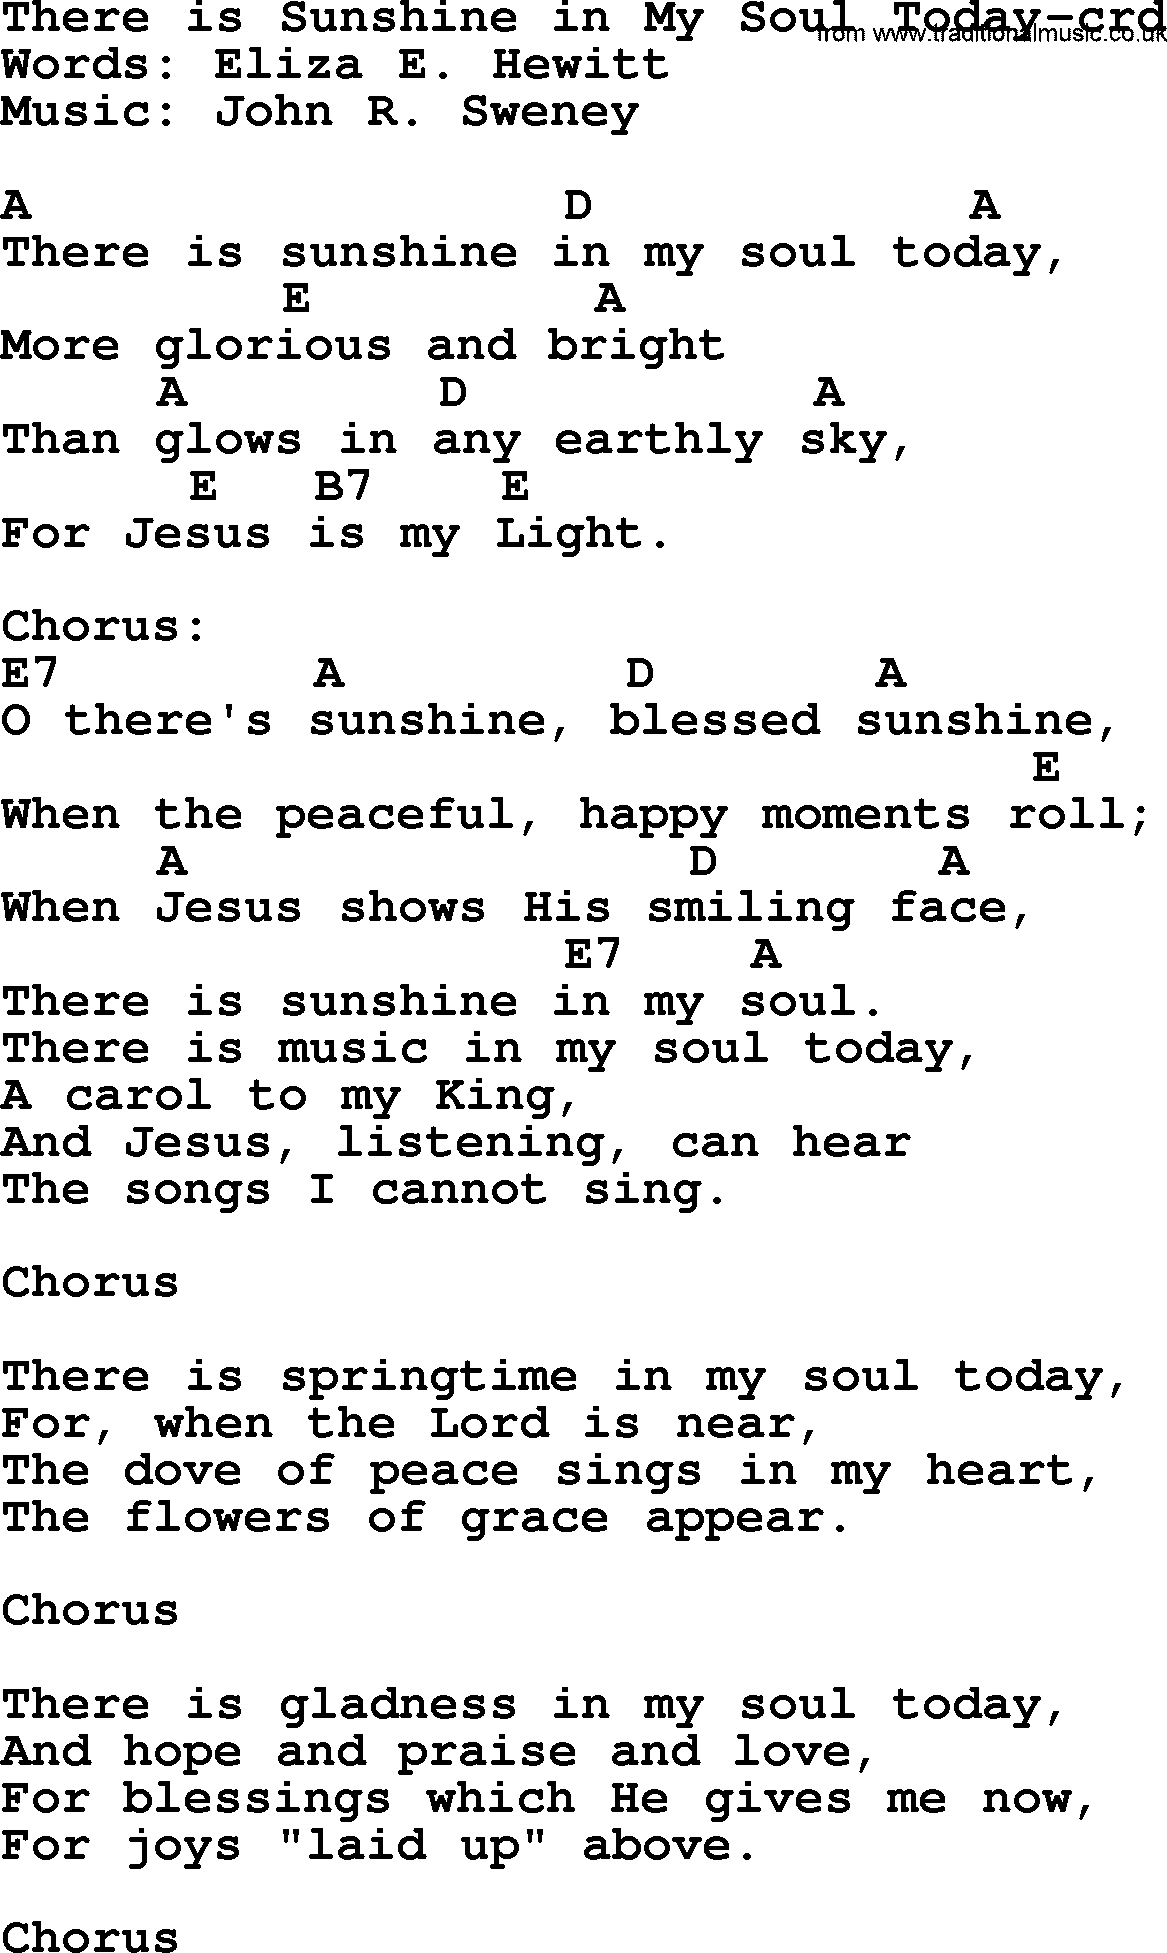 Top 500 Hymn: There Is Sunshine In My Soul Today, lyrics and chords